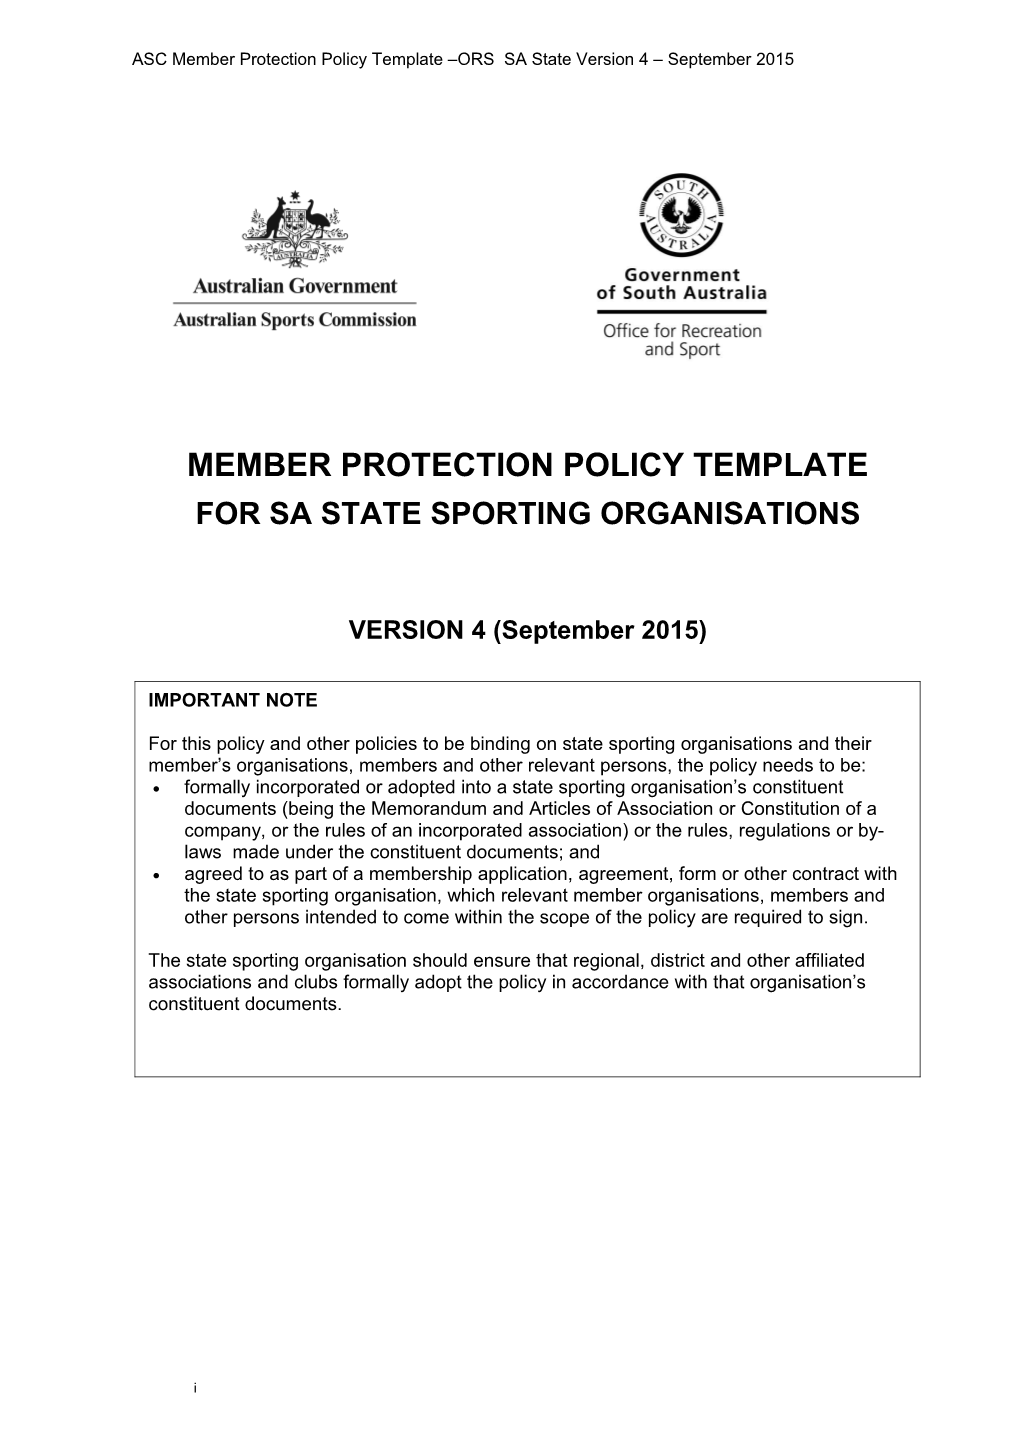 Member Protection Policy Template